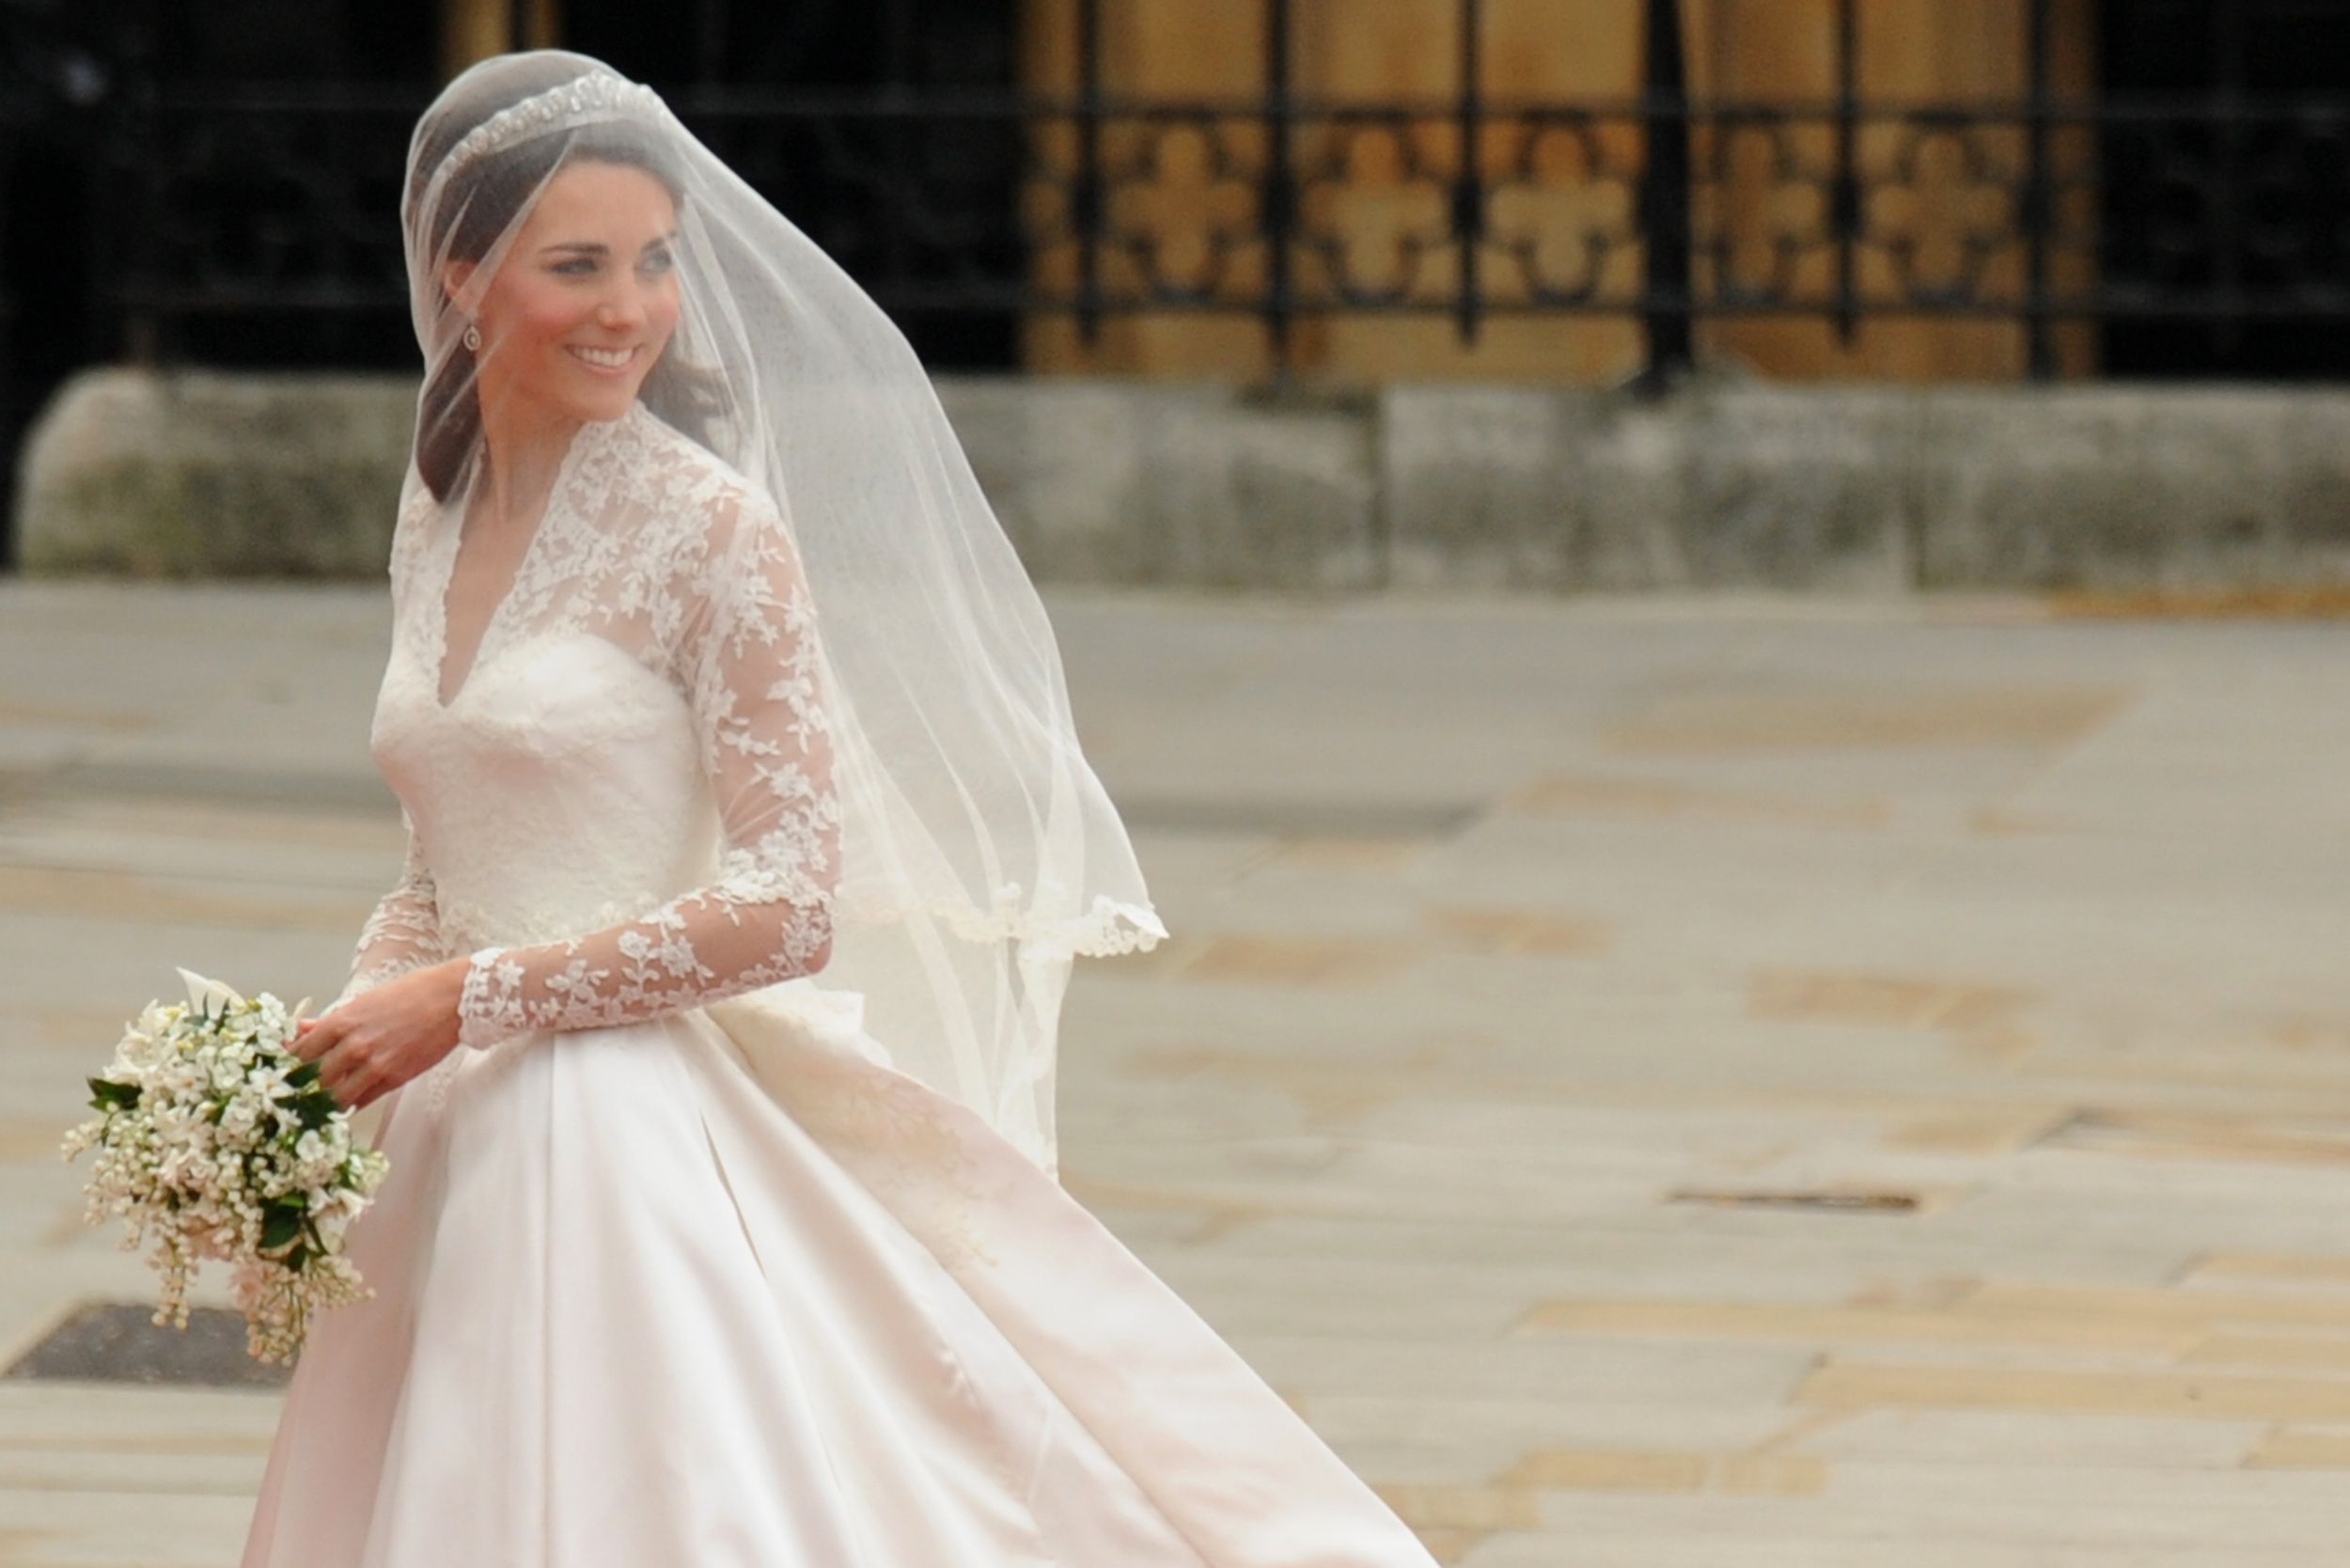 10 Things You Didn T Know About Kate Middleton S Wedding Dress Sarah Burton Designs The Royal Gown